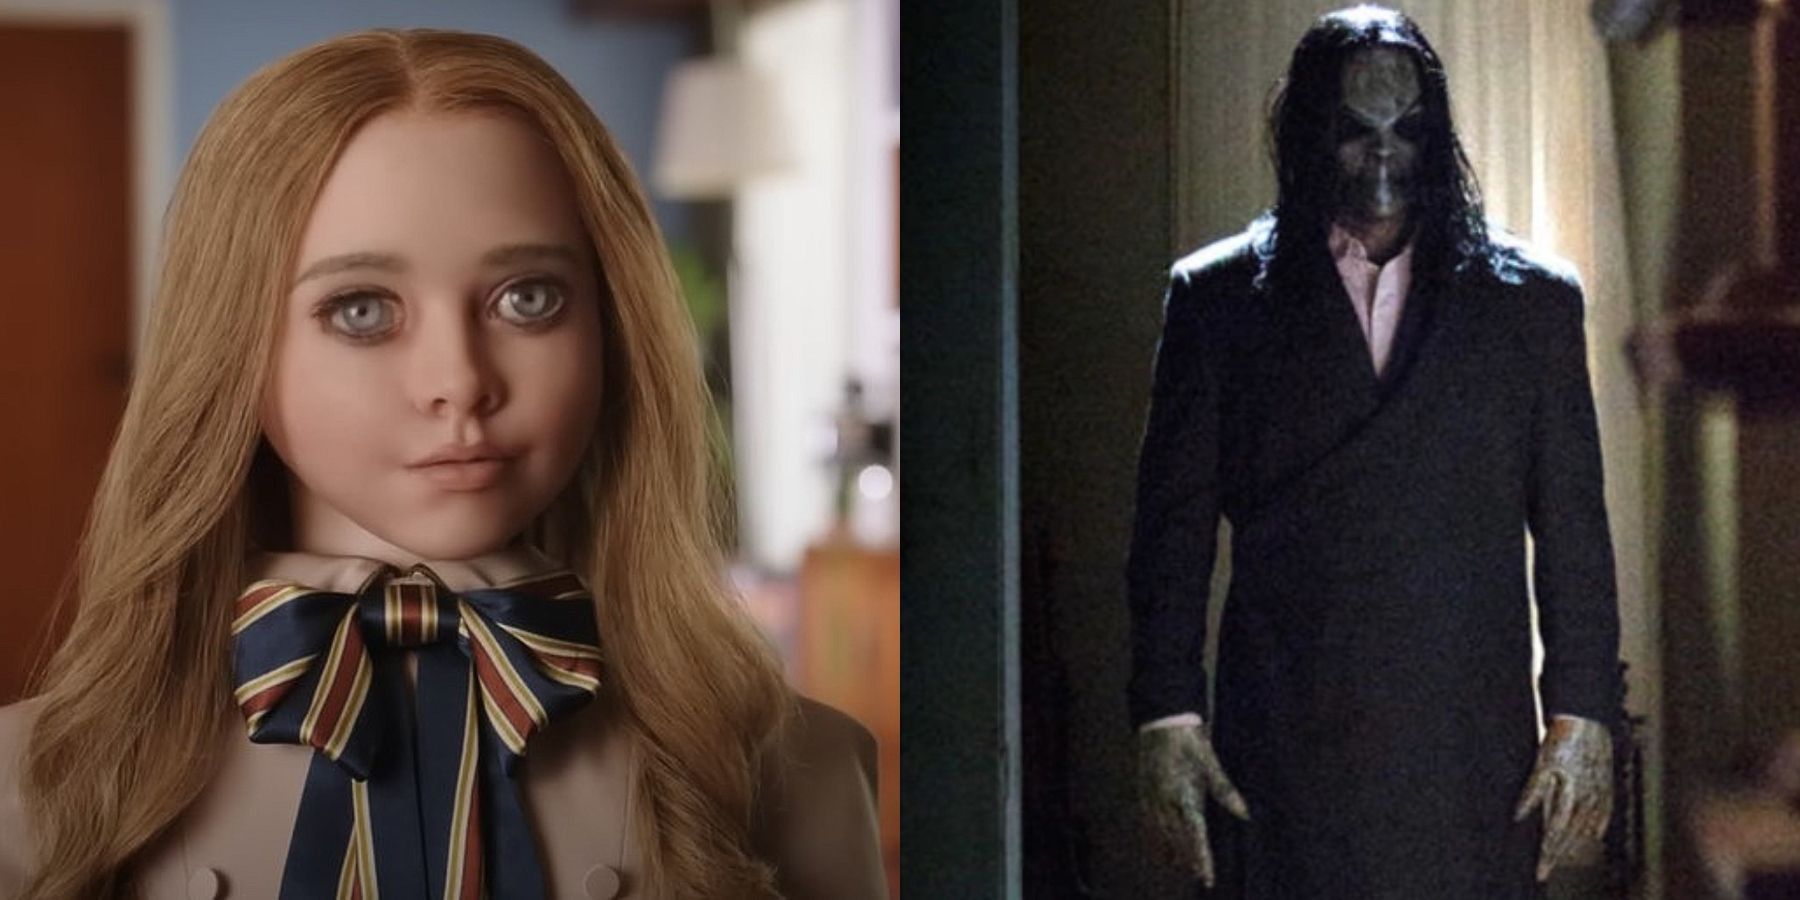 Split image of M3GAN the doll and Bughuul in Sinister